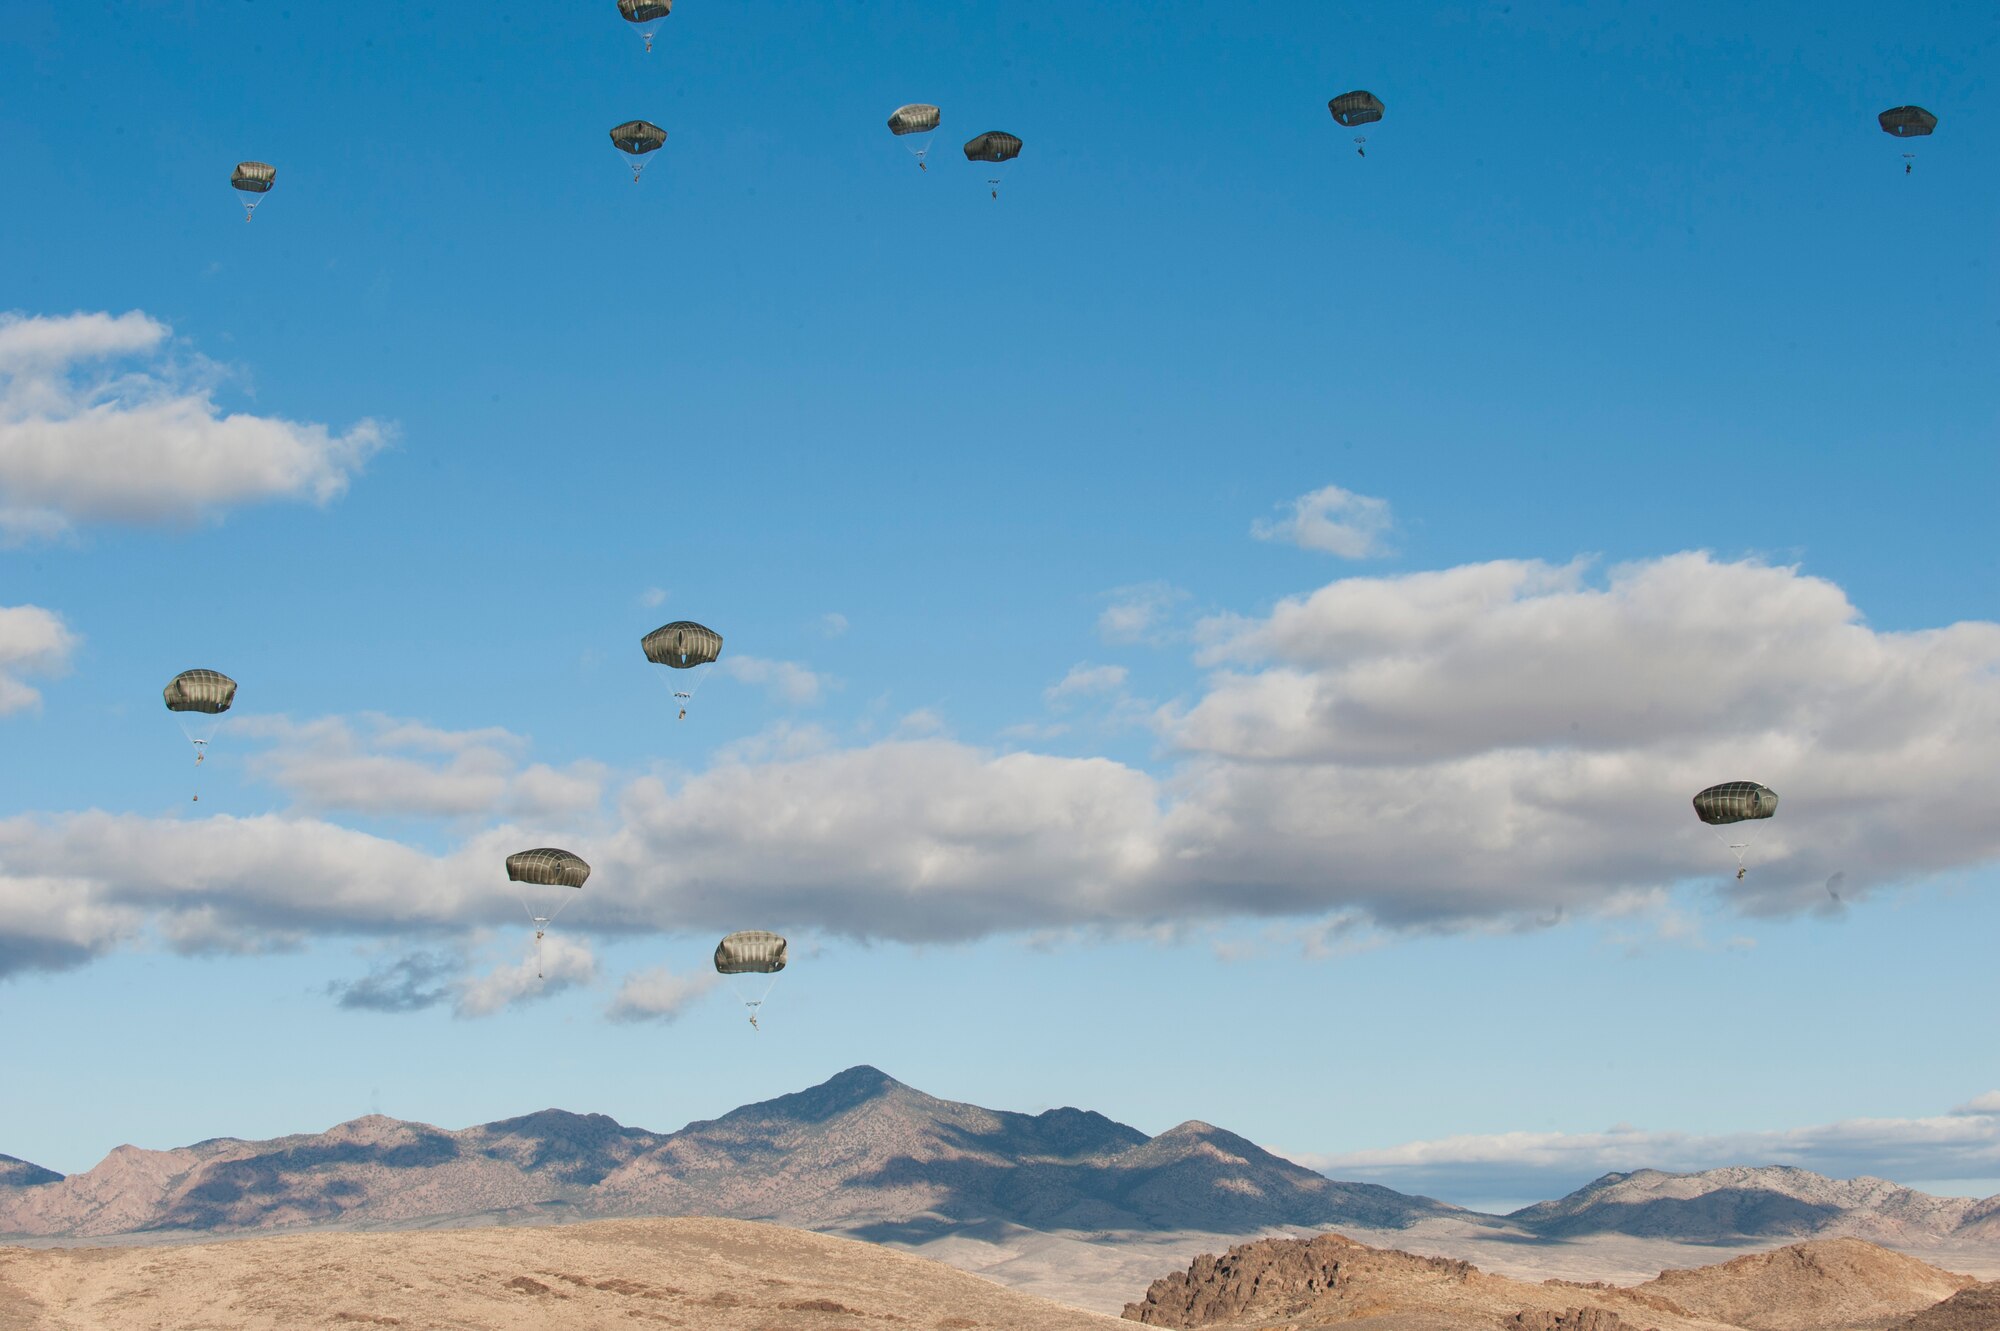 Paratroopers assigned to the 3rd Brigade Combat Team, 82nd Airborne Division, Fort Bragg, N.C., converge on their drop zone during the U.S. Air Force Weapons School's Joint Forcible Entry Exercise 14B over the Nevada Test and Training Range Dec. 6, 2014. The JFEX exercise is designed to simulate rapid deployment into a contested-degraded environment, and helps to maintain strong cohesion between Air Force and Army assets. (U.S. Air Force photo by Airman First Class Joshua Kleinholz)